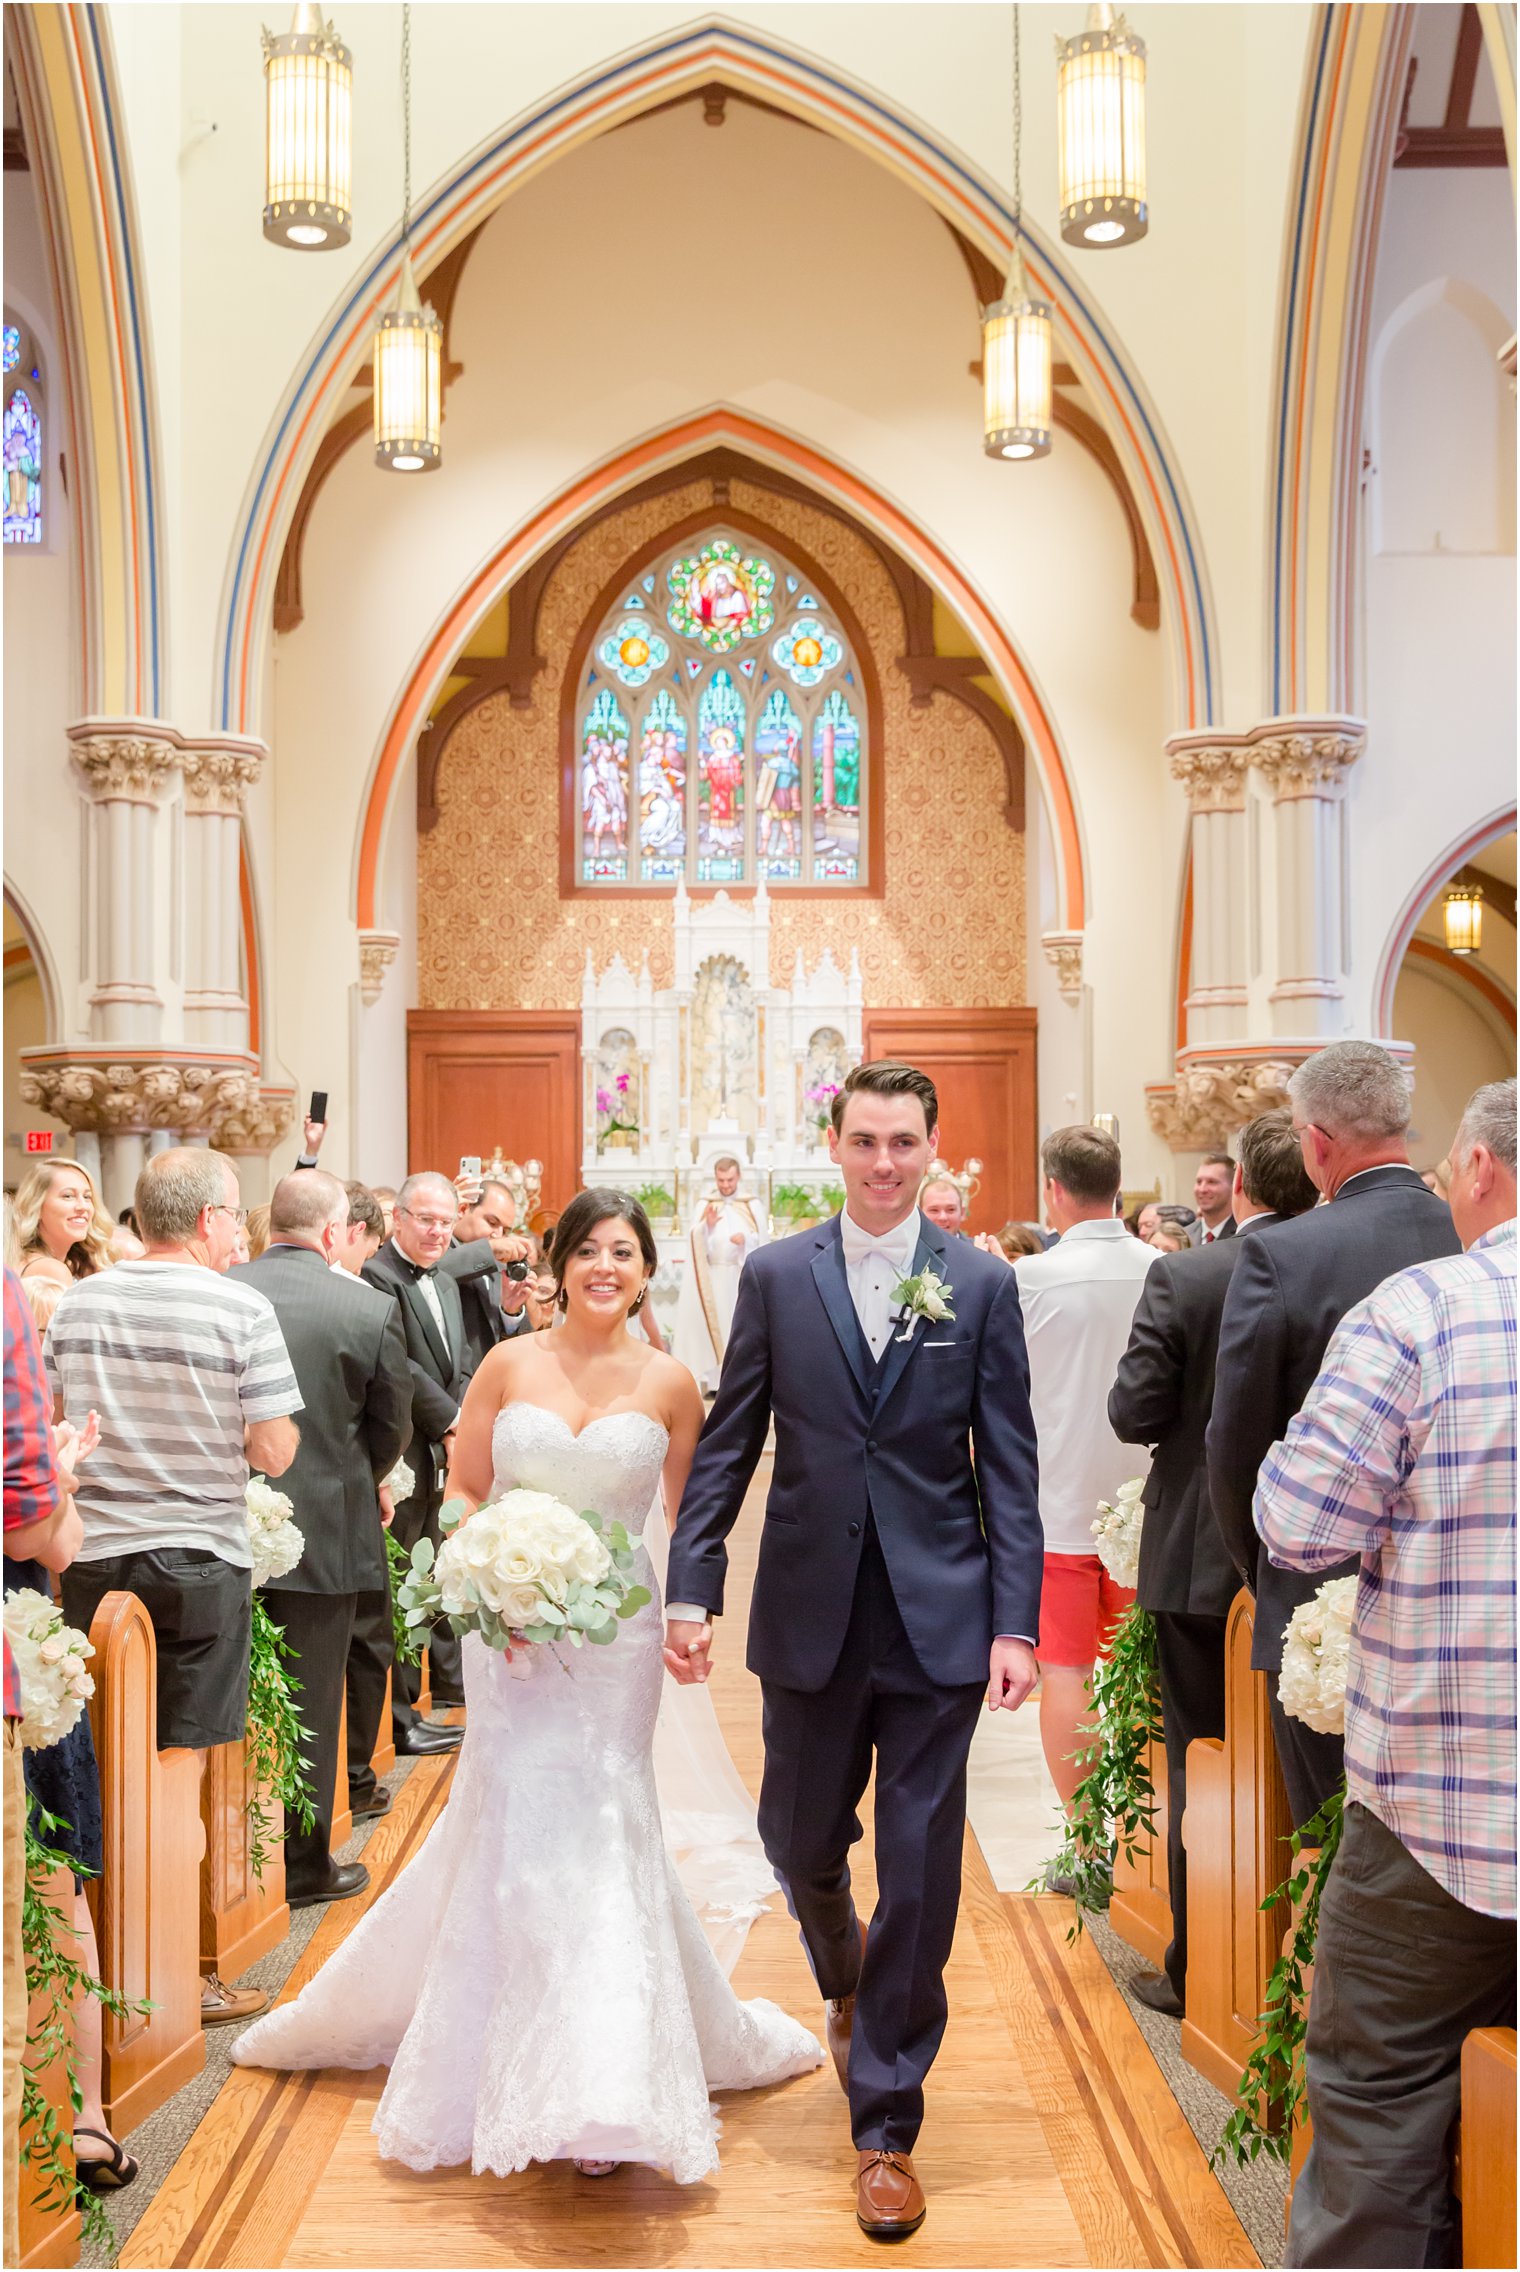 newlyweds in NJ church after ceremony photographed by Idalia Photography